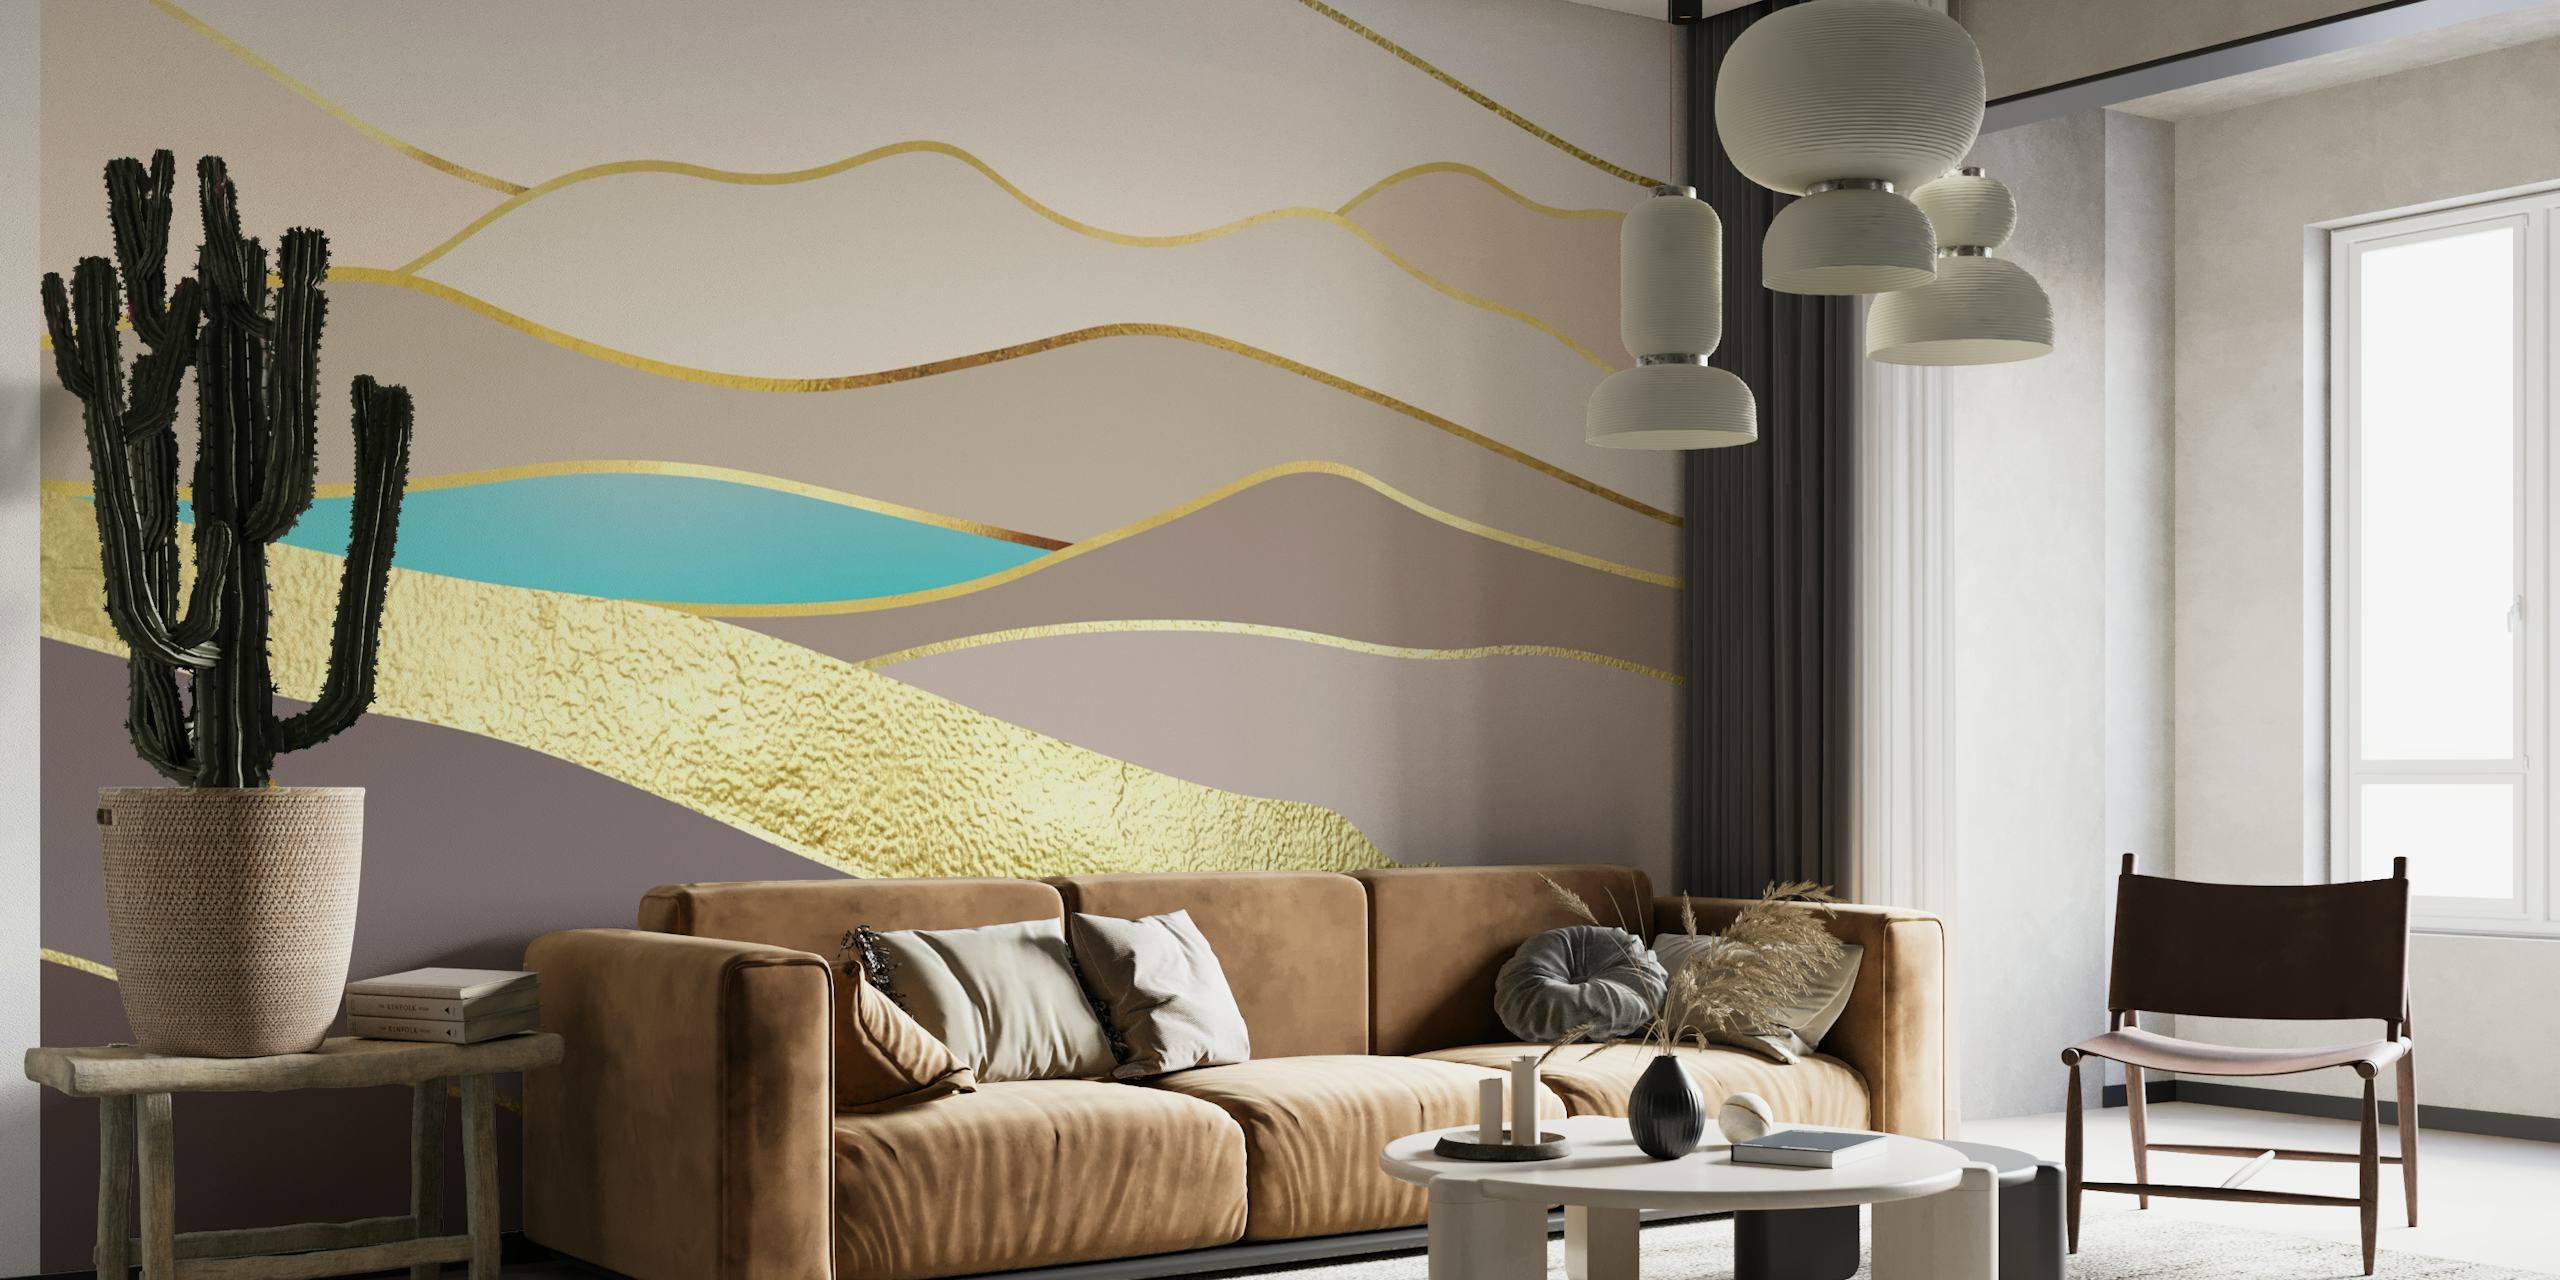 Abstract calm landscape wall mural with gentle slopes and metallic gold accents